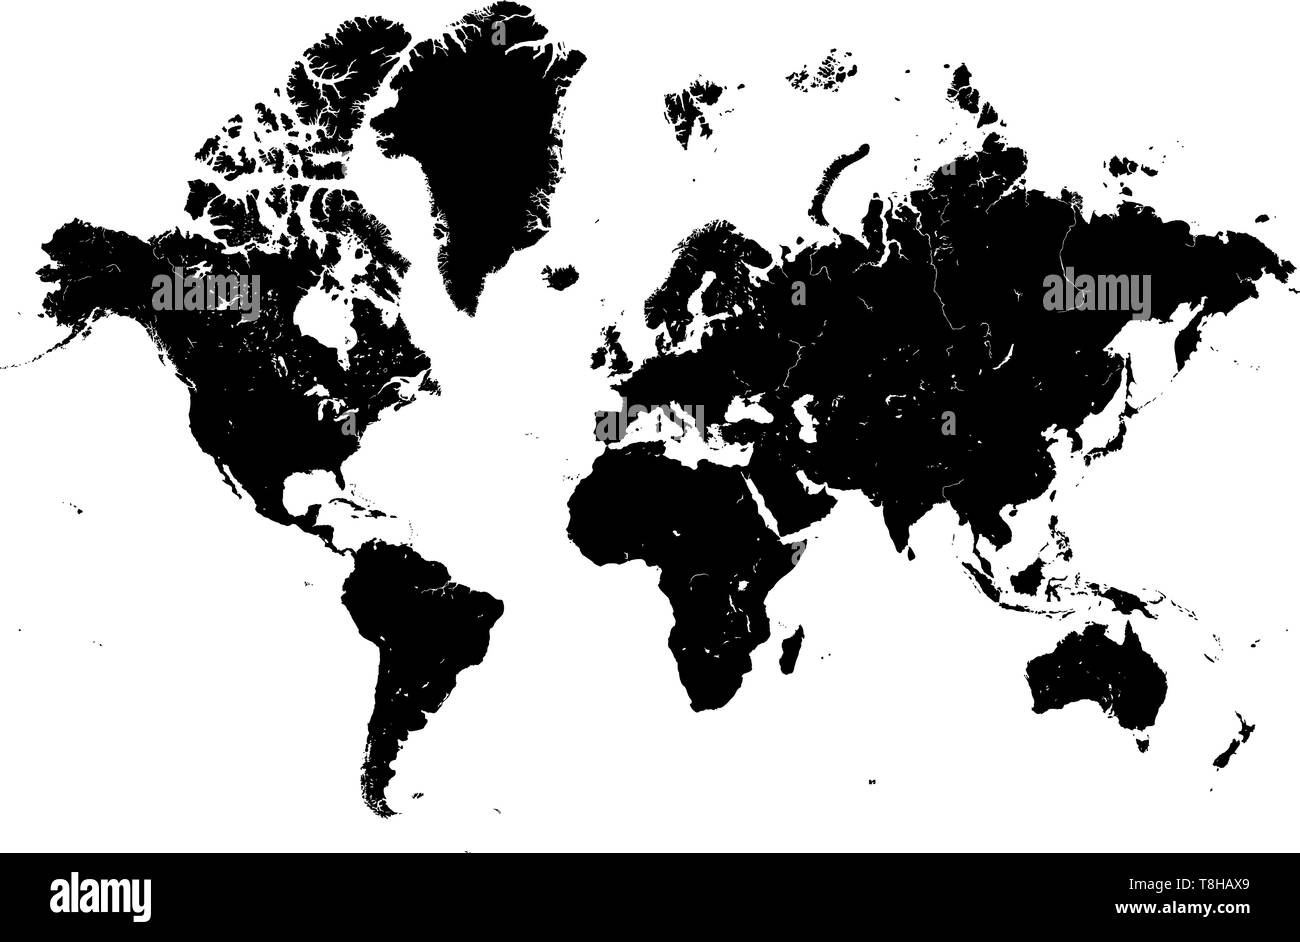 detailed world map countries vector Stock Vector